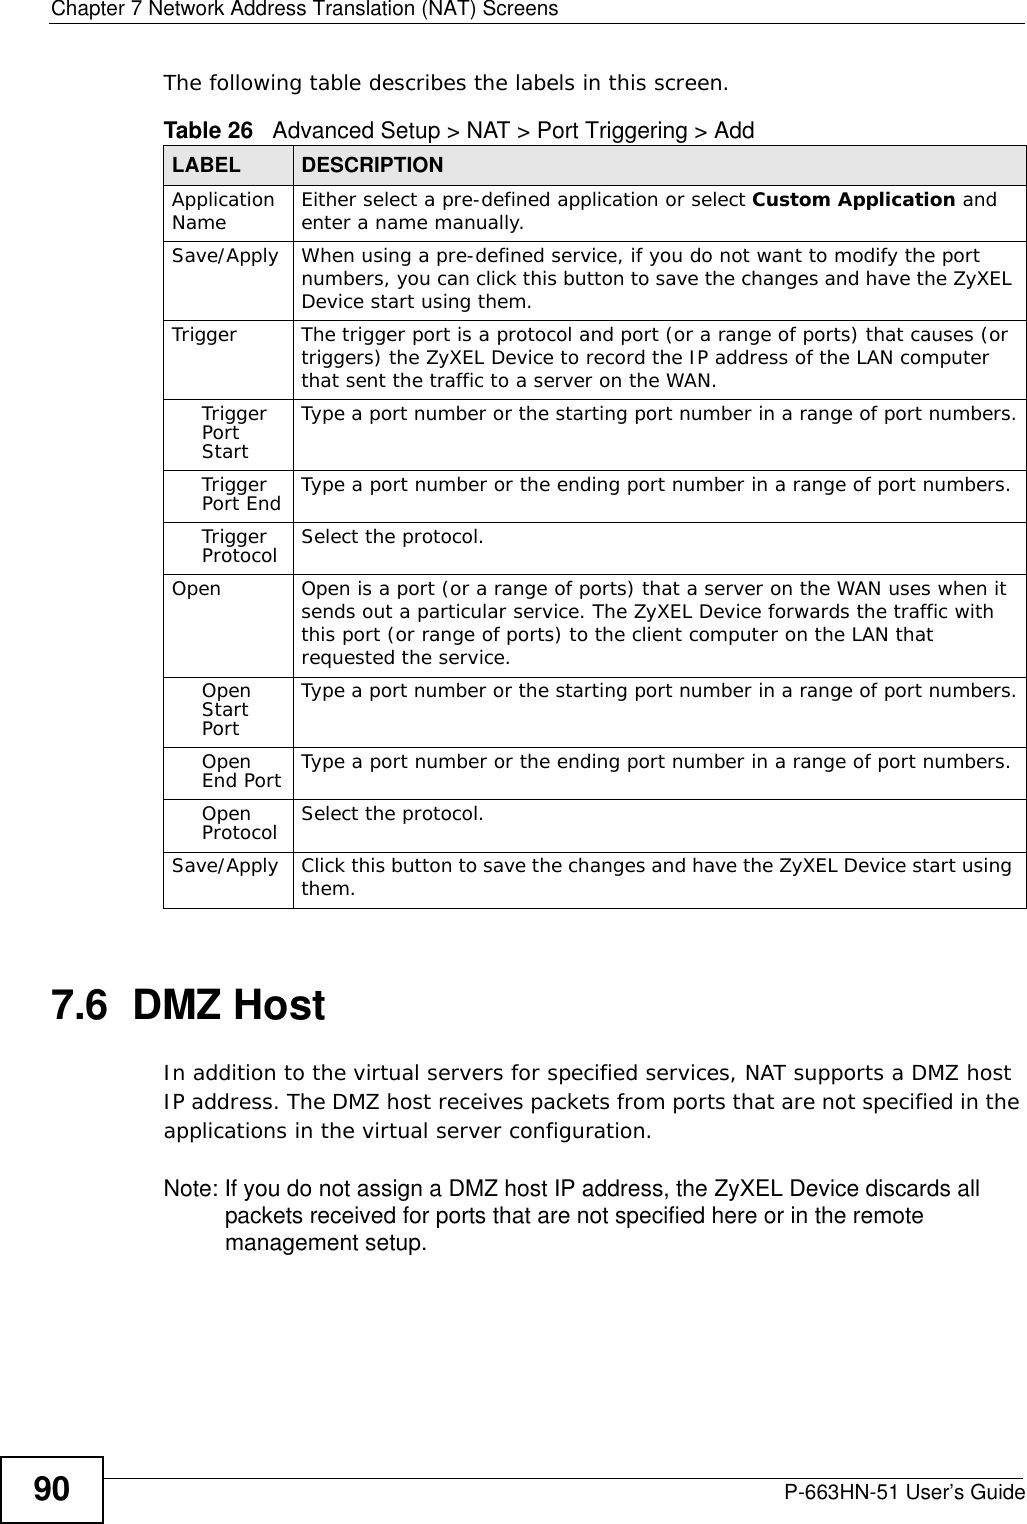 Chapter 7 Network Address Translation (NAT) ScreensP-663HN-51 User’s Guide90The following table describes the labels in this screen.  7.6  DMZ HostIn addition to the virtual servers for specified services, NAT supports a DMZ host IP address. The DMZ host receives packets from ports that are not specified in the applications in the virtual server configuration.Note: If you do not assign a DMZ host IP address, the ZyXEL Device discards all packets received for ports that are not specified here or in the remote management setup.Table 26   Advanced Setup &gt; NAT &gt; Port Triggering &gt; Add LABEL DESCRIPTIONApplication Name Either select a pre-defined application or select Custom Application and enter a name manually. Save/Apply When using a pre-defined service, if you do not want to modify the port numbers, you can click this button to save the changes and have the ZyXEL Device start using them.Trigger  The trigger port is a protocol and port (or a range of ports) that causes (or triggers) the ZyXEL Device to record the IP address of the LAN computer that sent the traffic to a server on the WAN.Trigger Port StartType a port number or the starting port number in a range of port numbers.Trigger Port End Type a port number or the ending port number in a range of port numbers.Trigger Protocol Select the protocol.Open Open is a port (or a range of ports) that a server on the WAN uses when it sends out a particular service. The ZyXEL Device forwards the traffic with this port (or range of ports) to the client computer on the LAN that requested the service. Open Start PortType a port number or the starting port number in a range of port numbers.Open End Port Type a port number or the ending port number in a range of port numbers.Open Protocol Select the protocol.Save/Apply Click this button to save the changes and have the ZyXEL Device start using them.